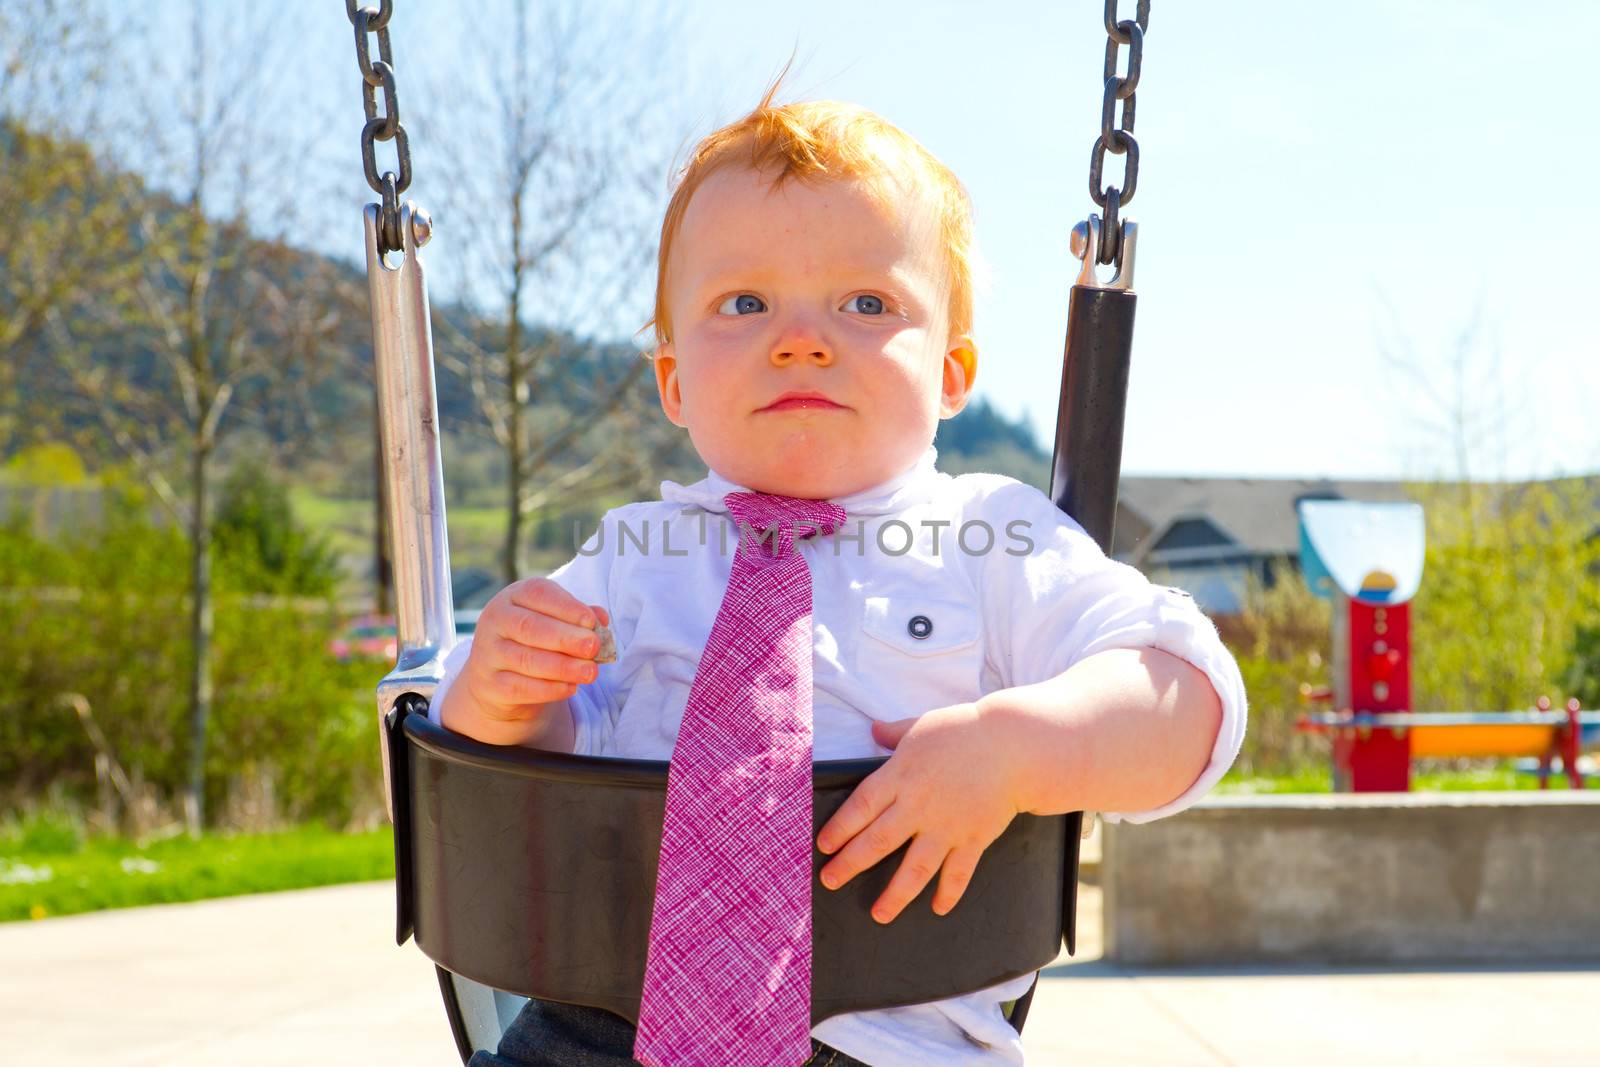 A baby boy plays on a swing set at the park wearing nice clothing.